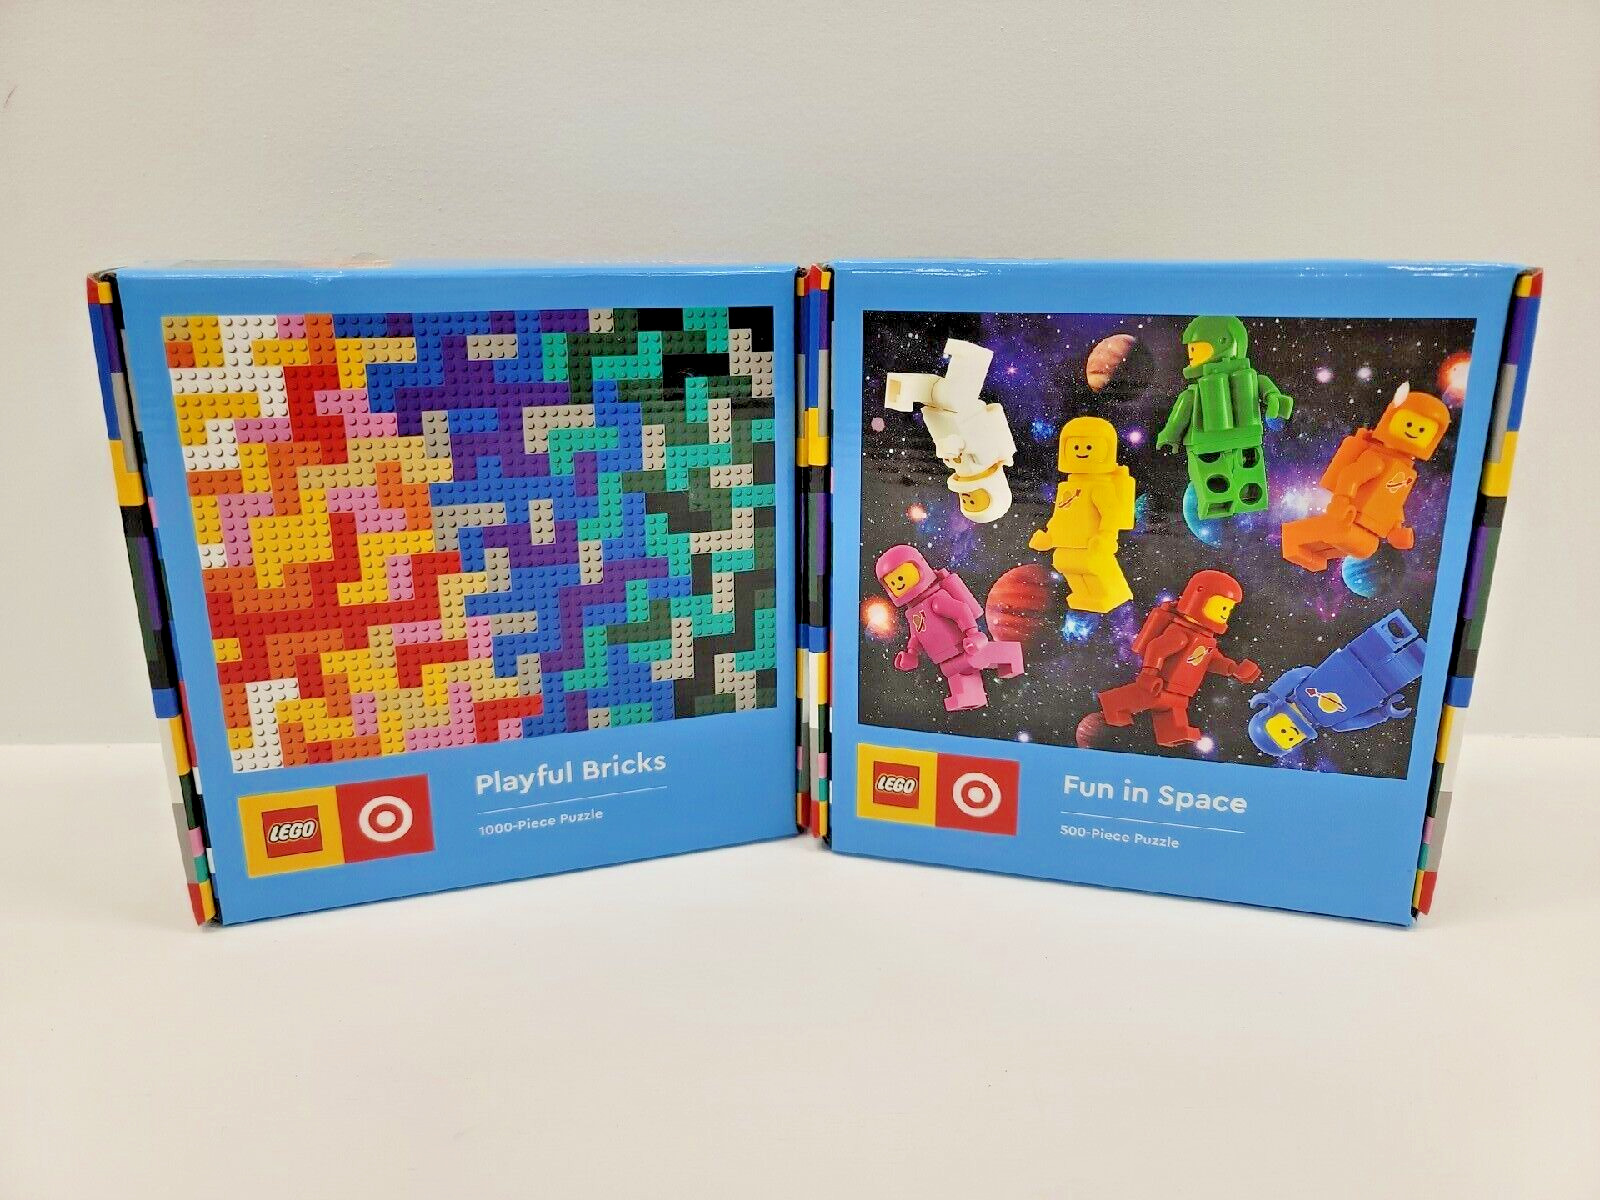 2x New! LEGO Collection x Target Playful Bricks 1000 Puzzle Fun in Space 500 